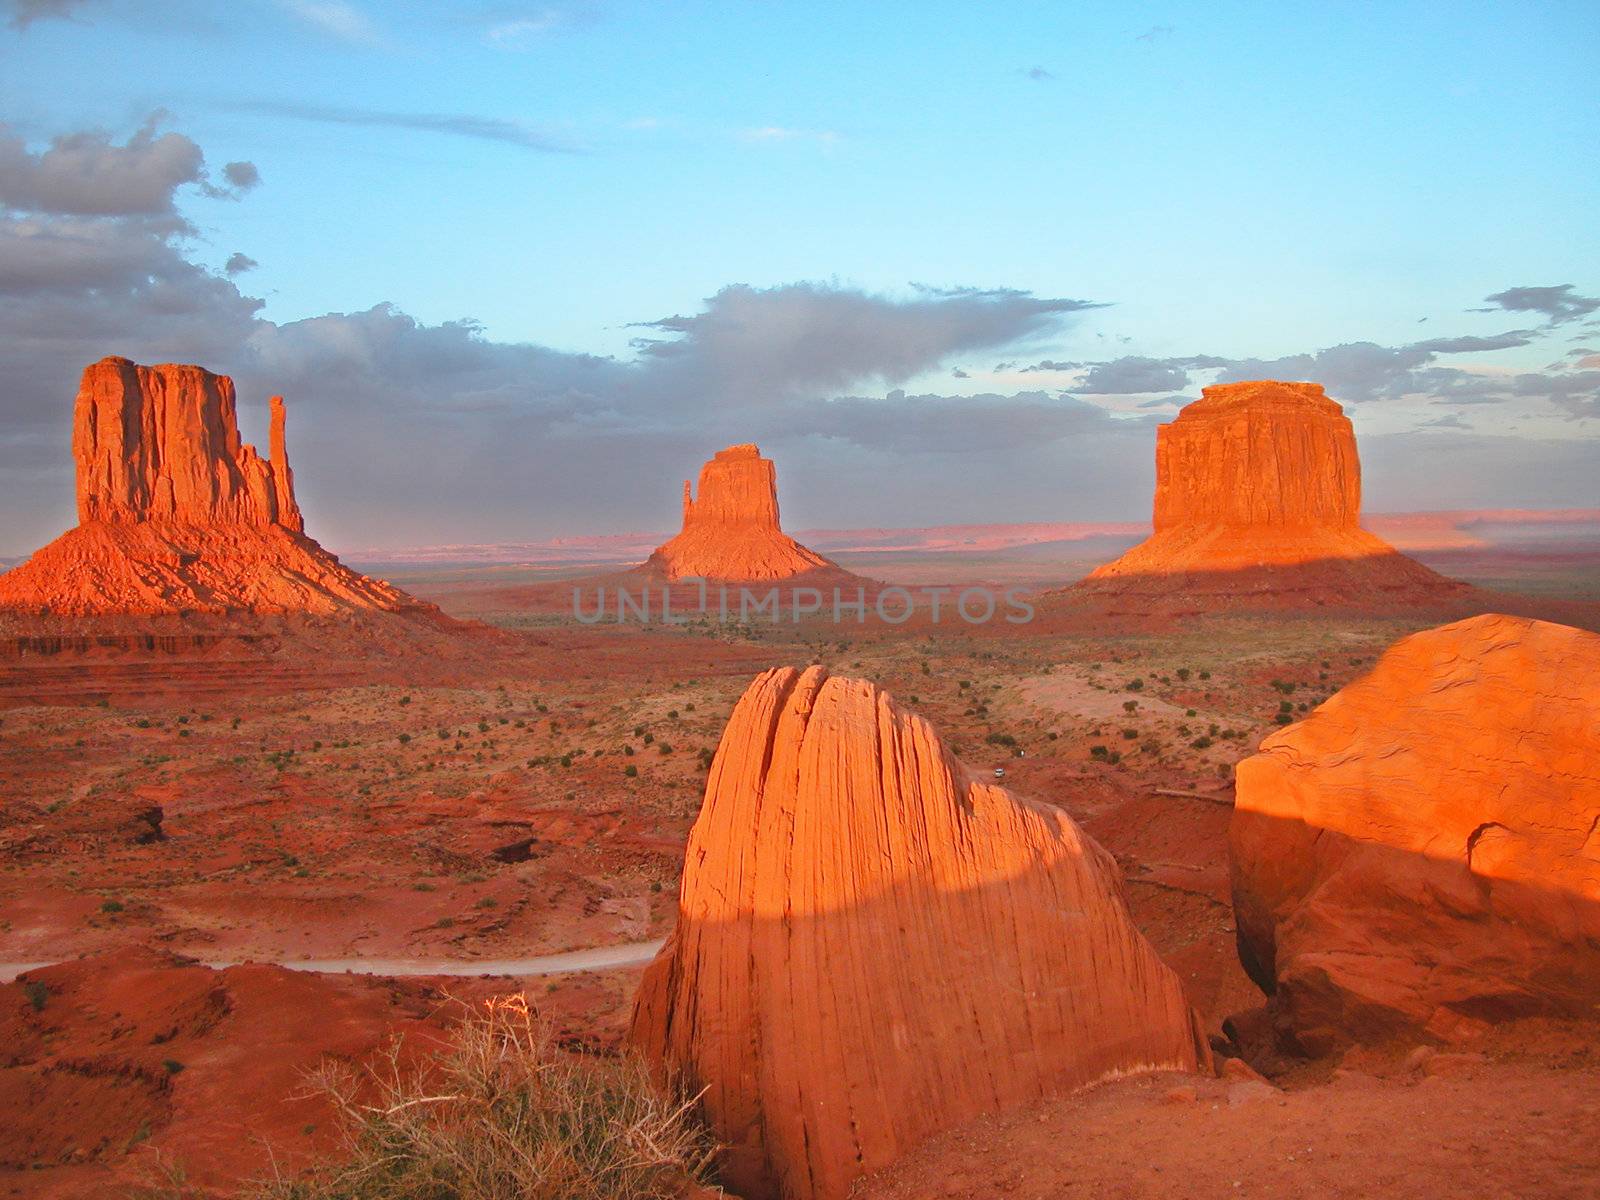 A stunning view of the Monument Valley from the hill